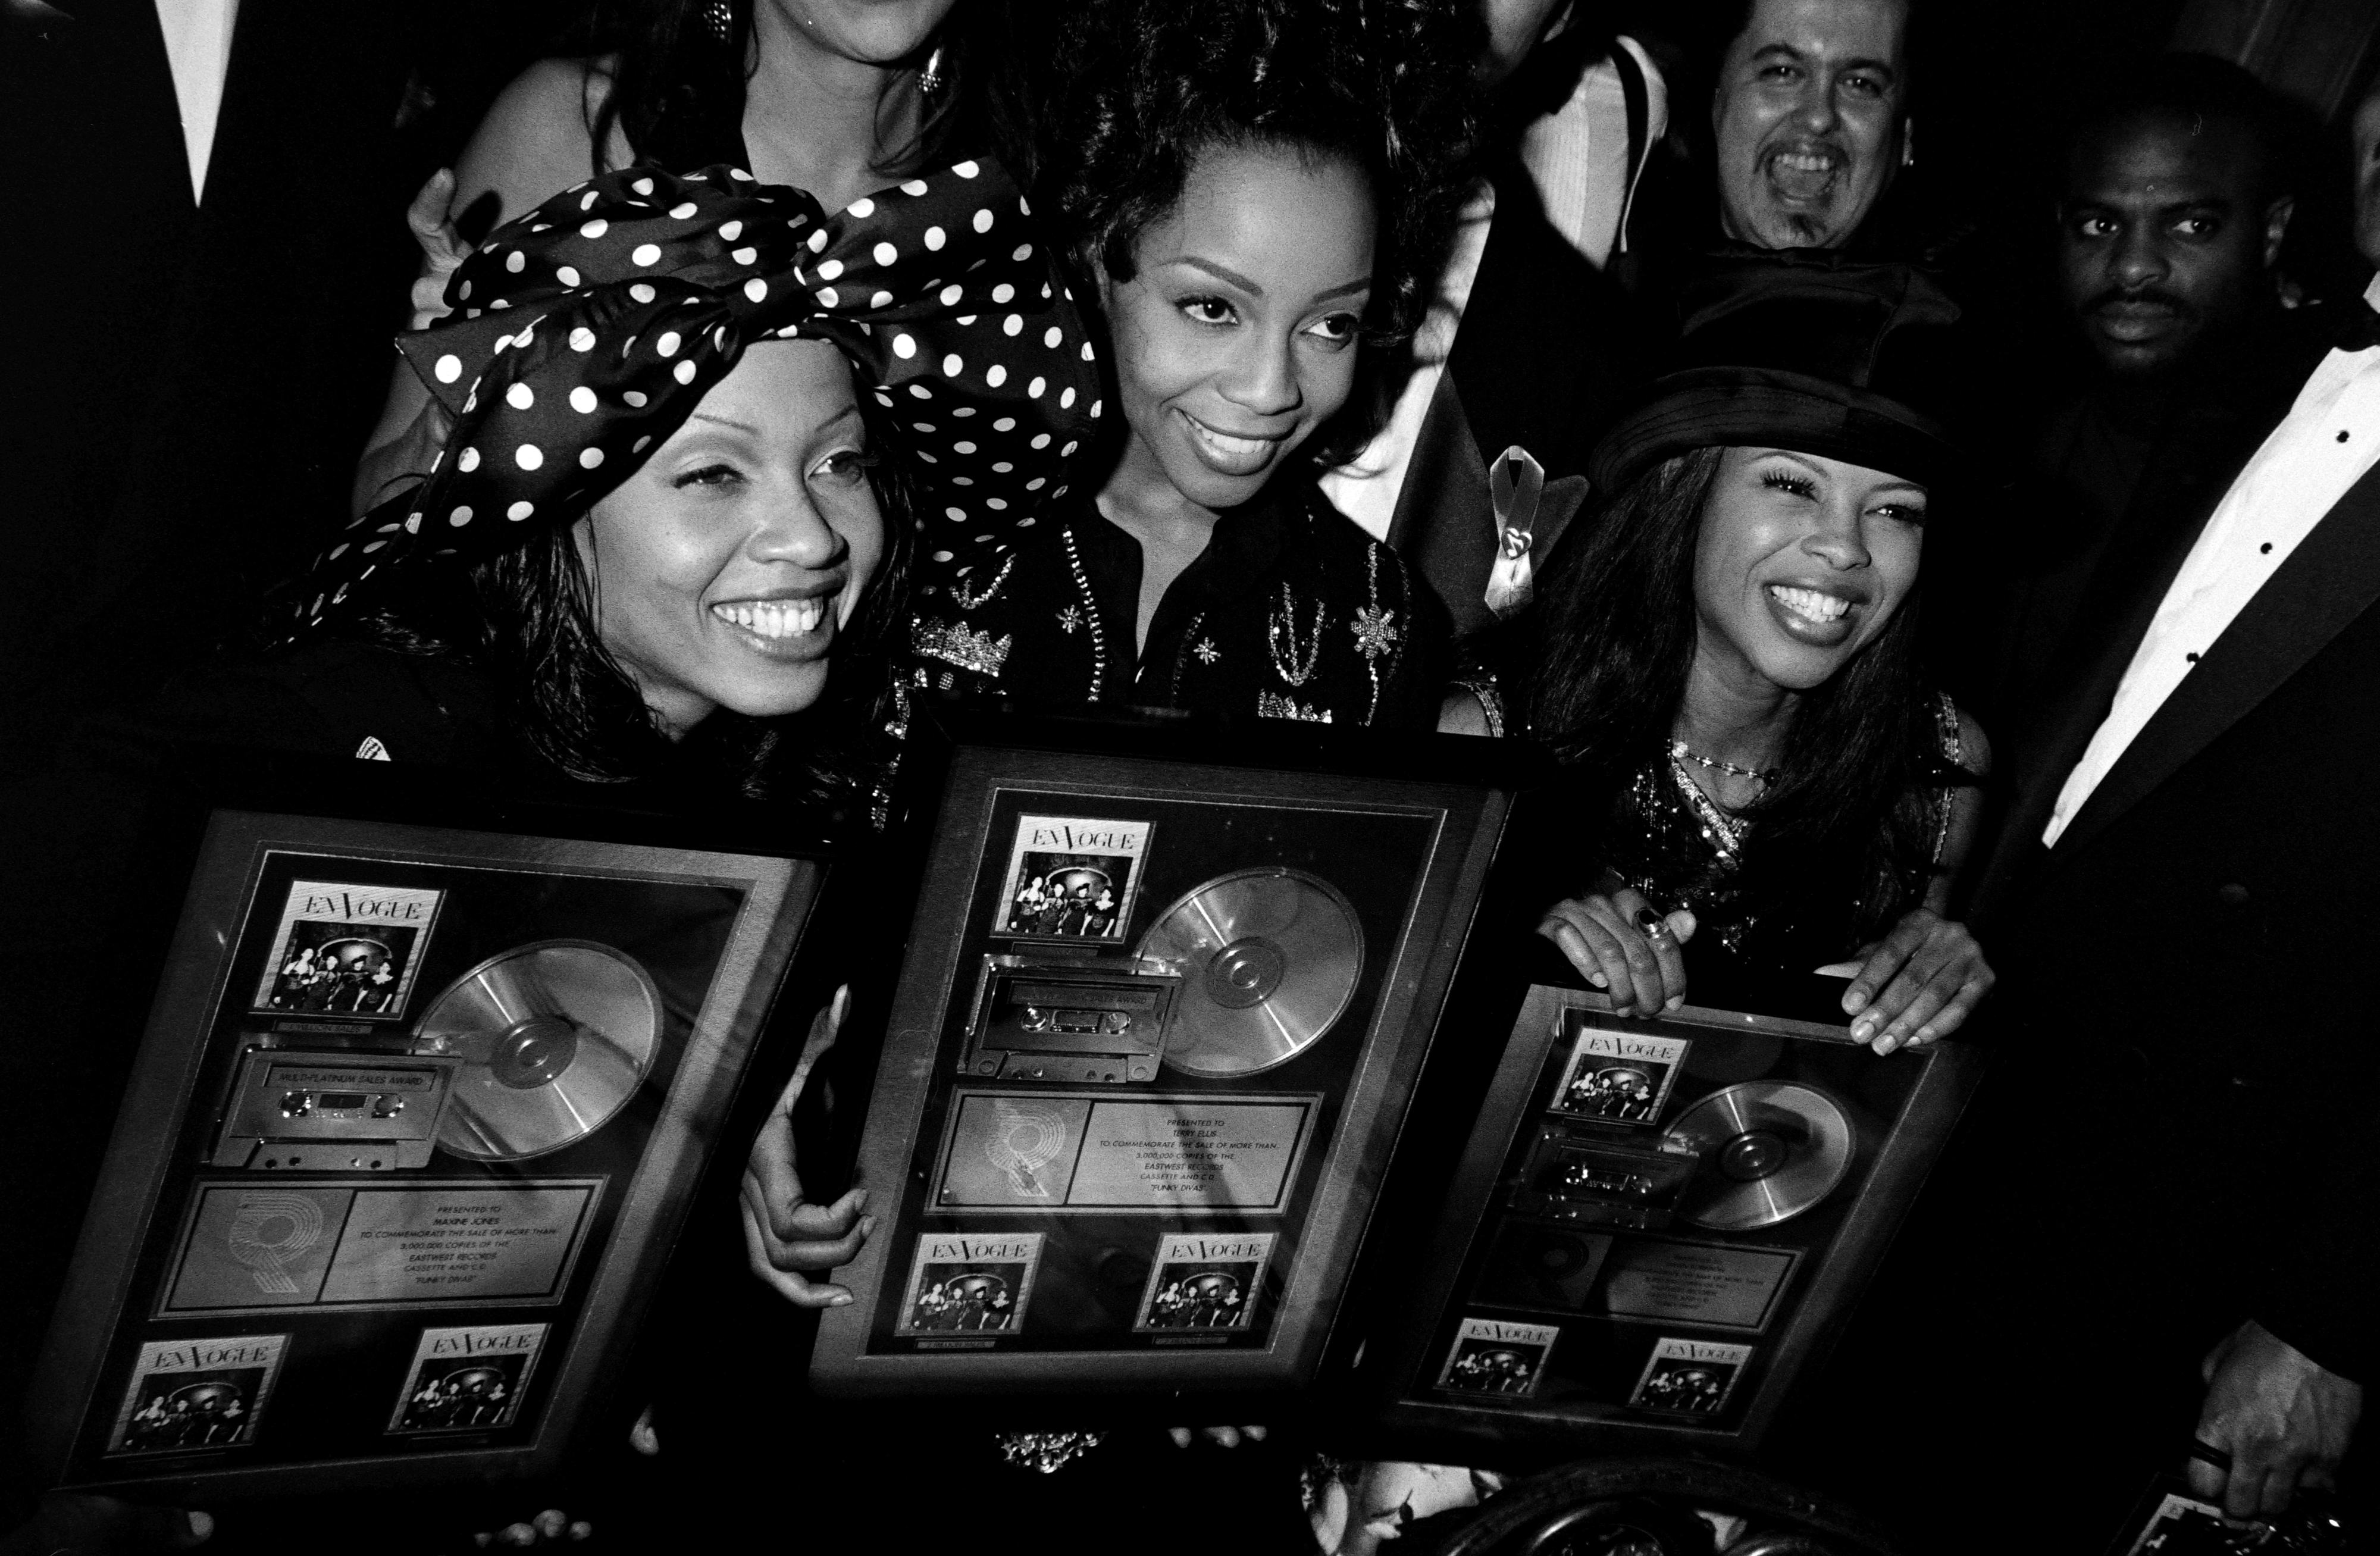 Three women smiling, holding music awards plaques, dressed in formal attire